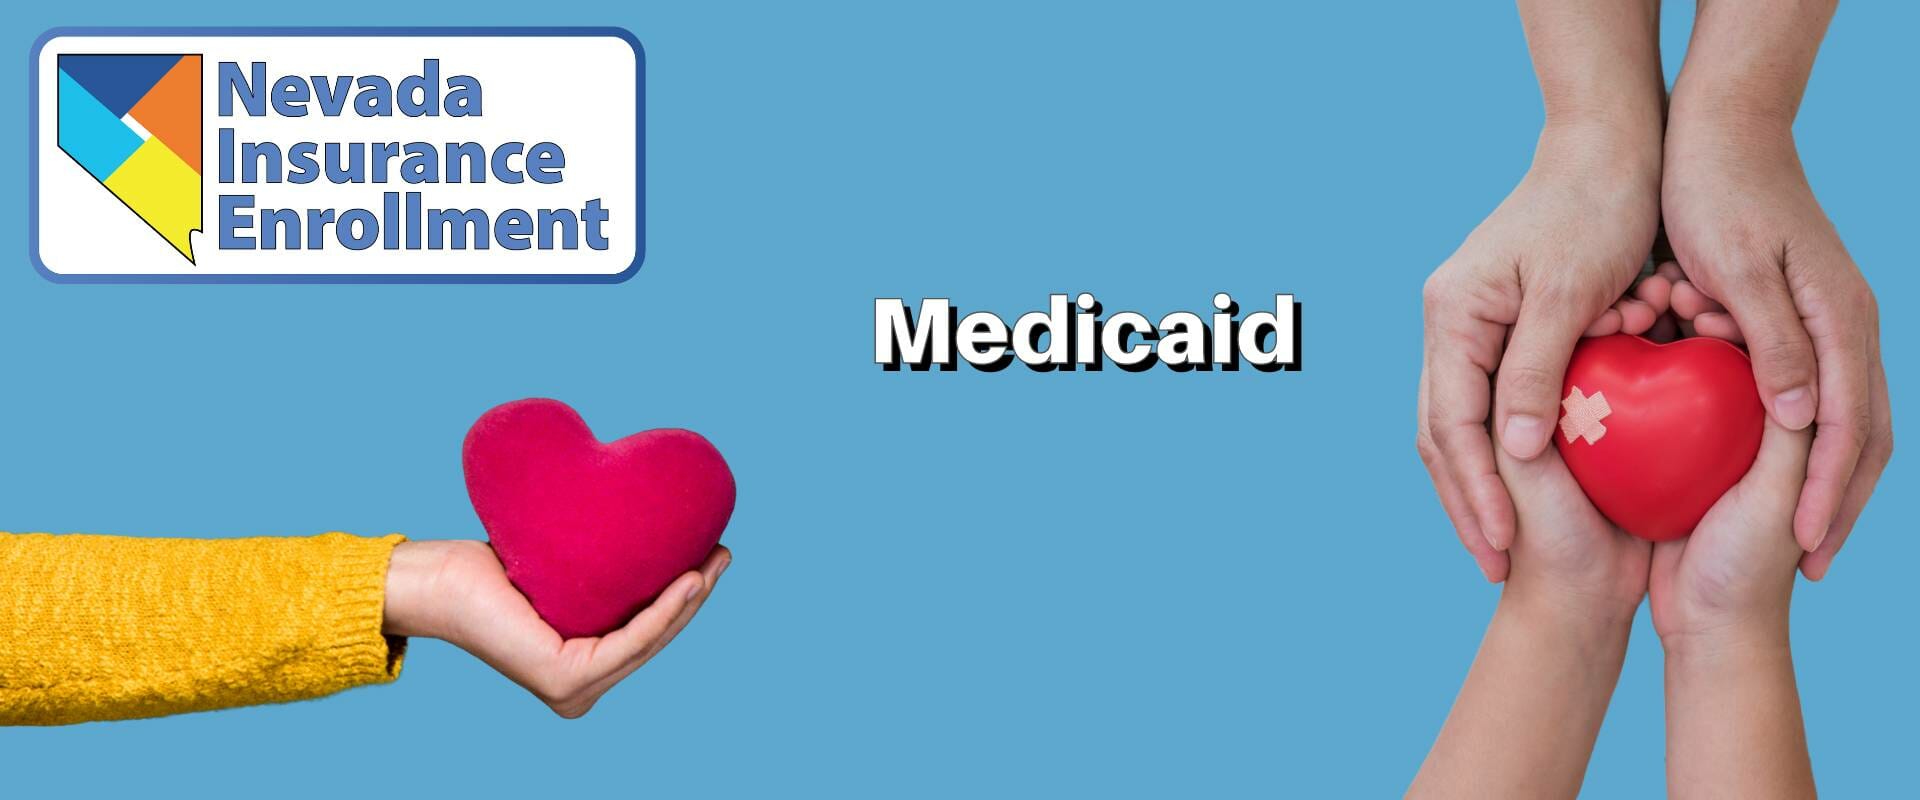 Nevada Medicaid (Mobile Vertical) MAIN page image